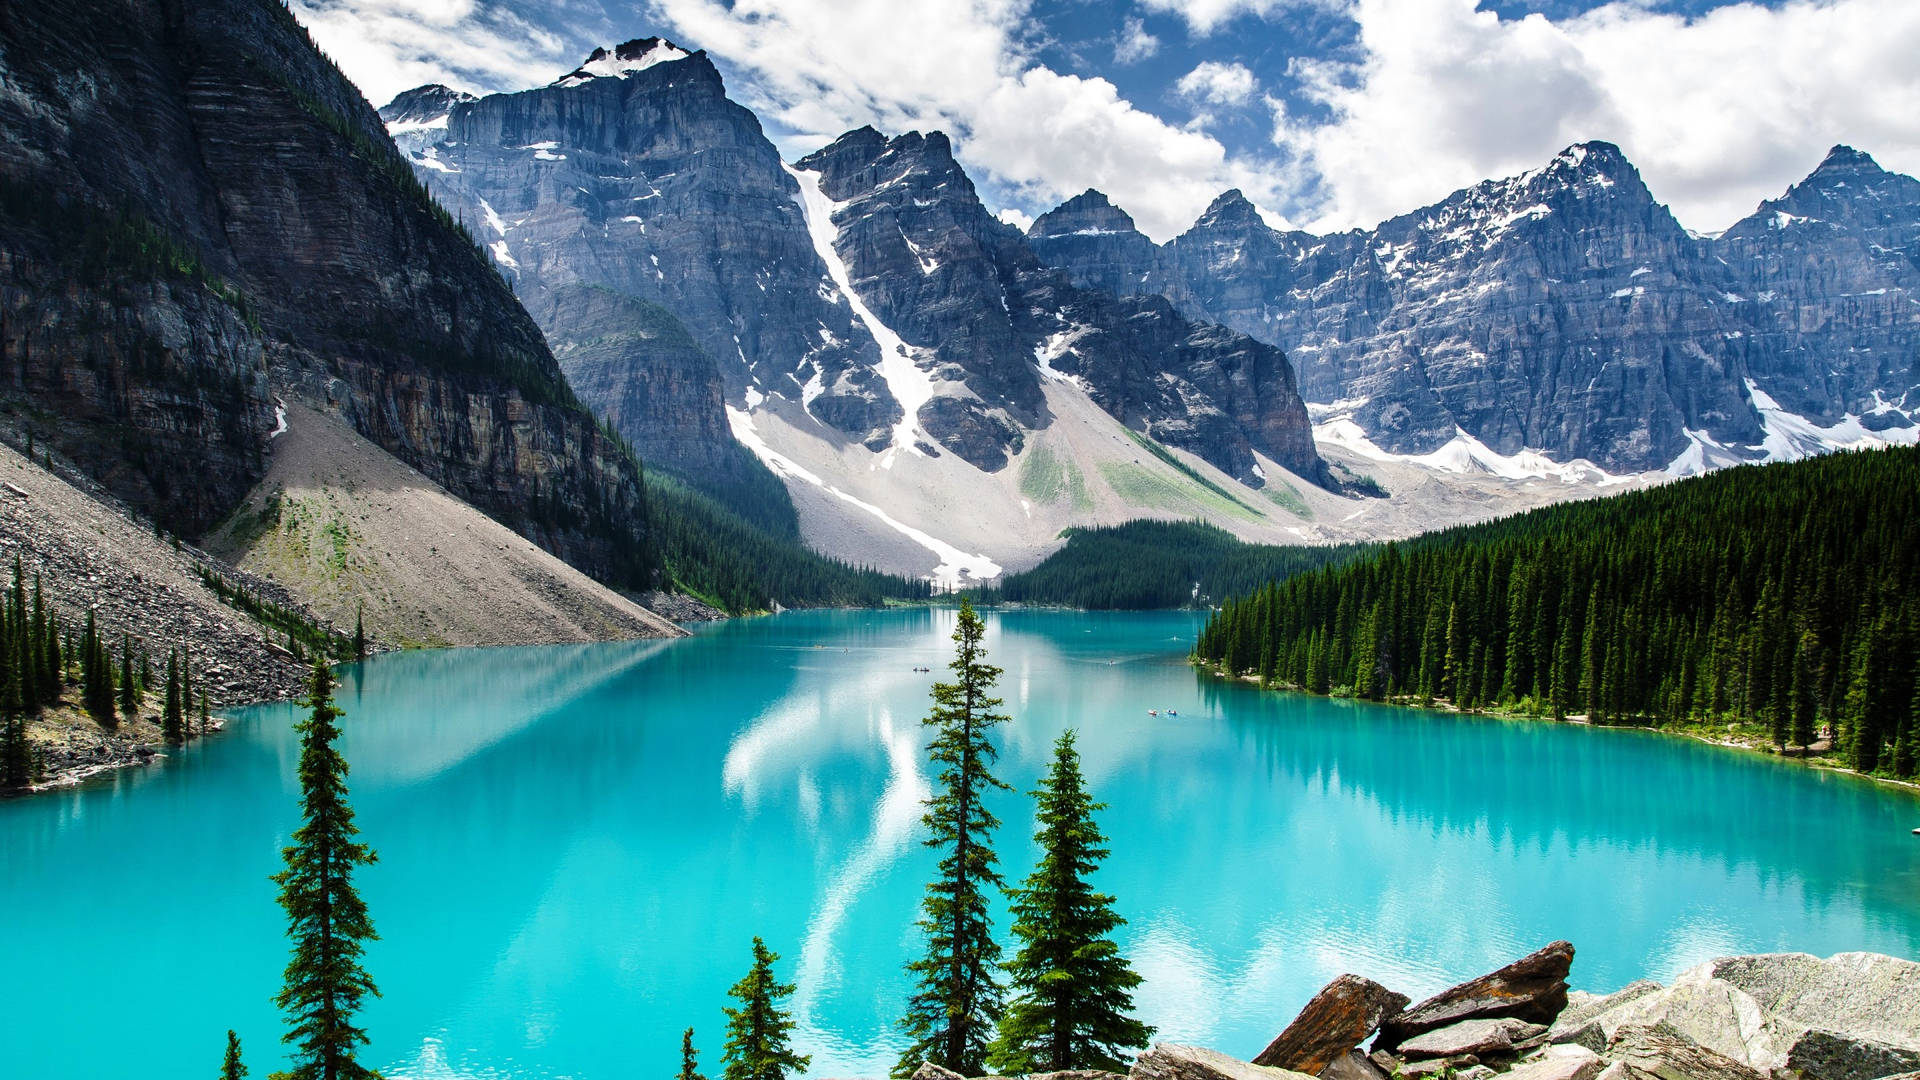 Rocky Mountain With Forest Surrounding Body Of Water Wallpaper